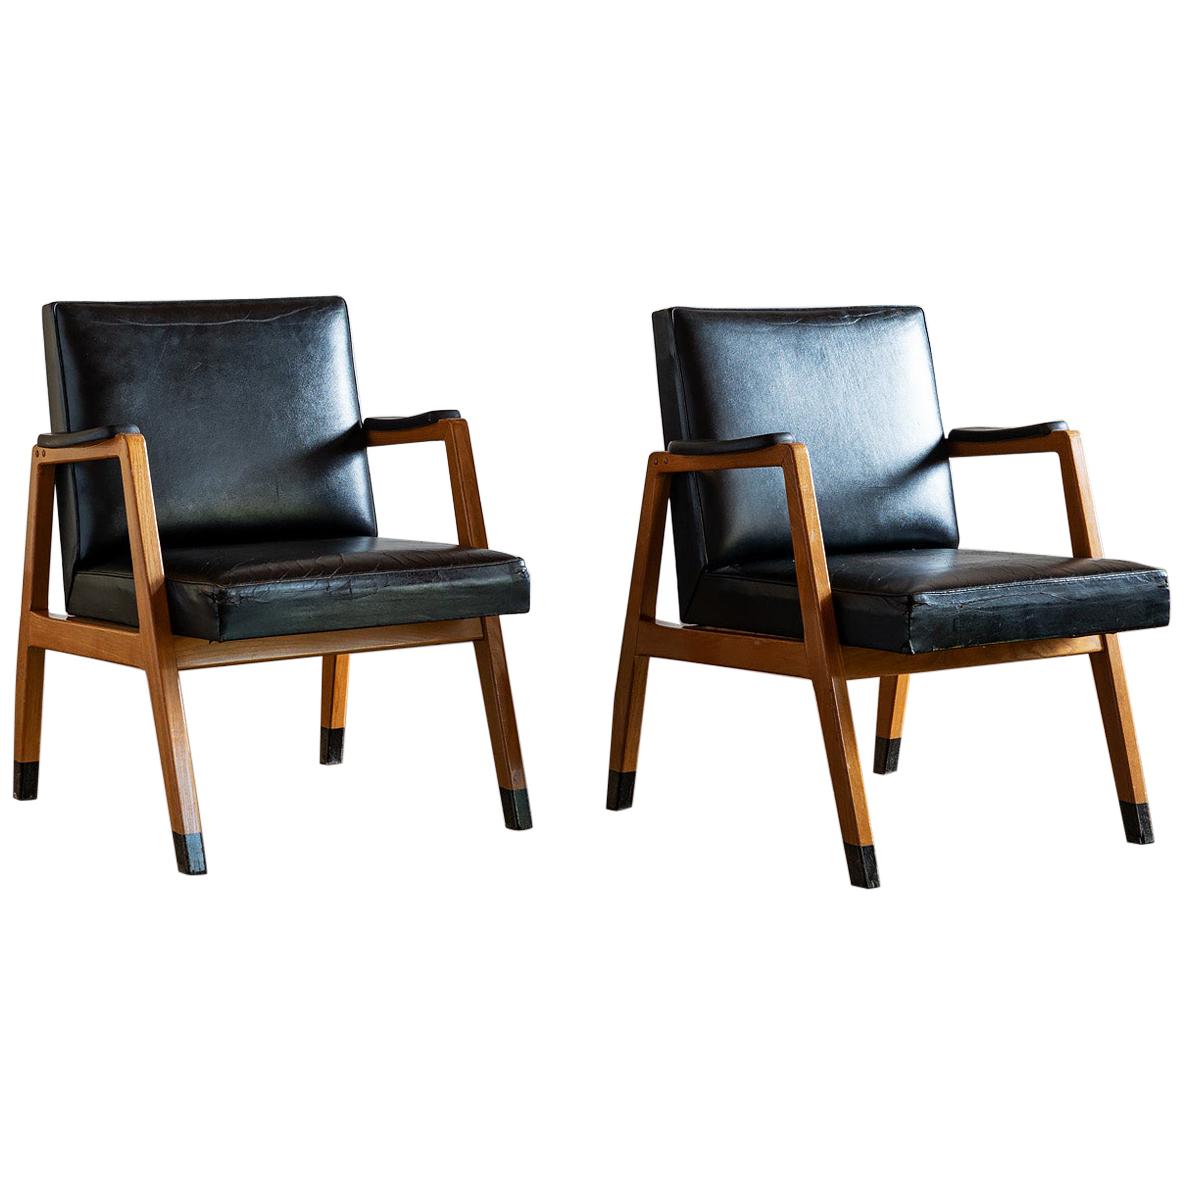 Pair of Finnish Armchairs by Lasse Ollinkari and Aarne Ervi, 1940s